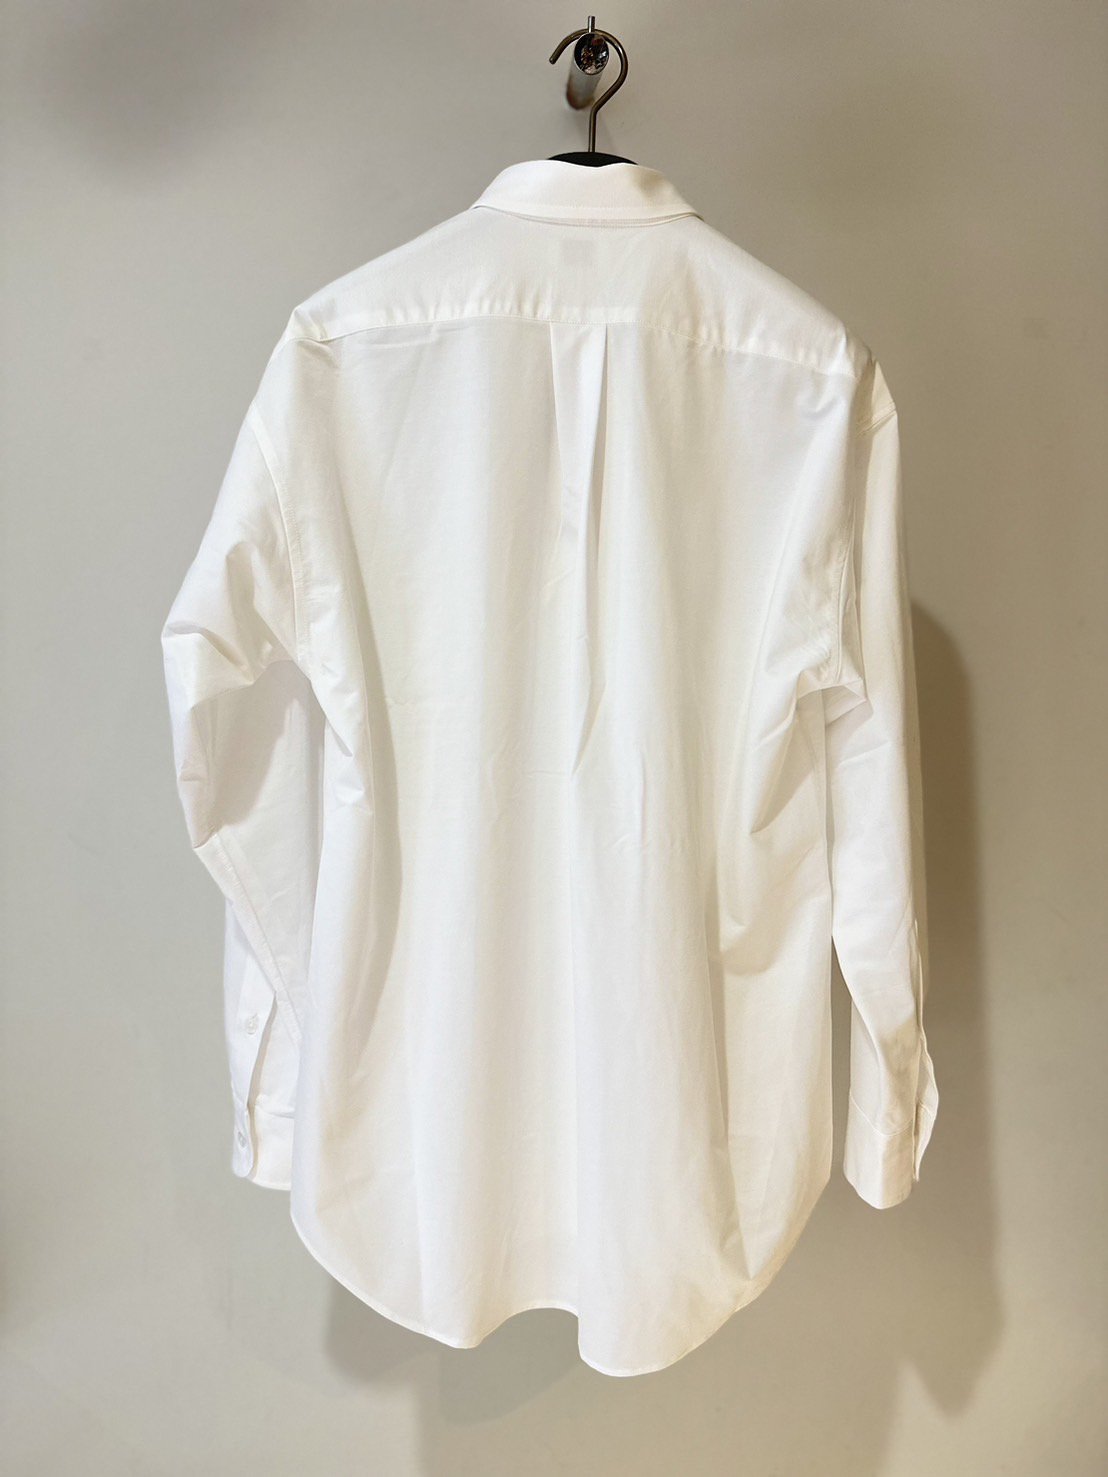 ALLEGE<br />AllegeKANEMASA Standaed Shirt / White<img class='new_mark_img2' src='https://img.shop-pro.jp/img/new/icons47.gif' style='border:none;display:inline;margin:0px;padding:0px;width:auto;' />